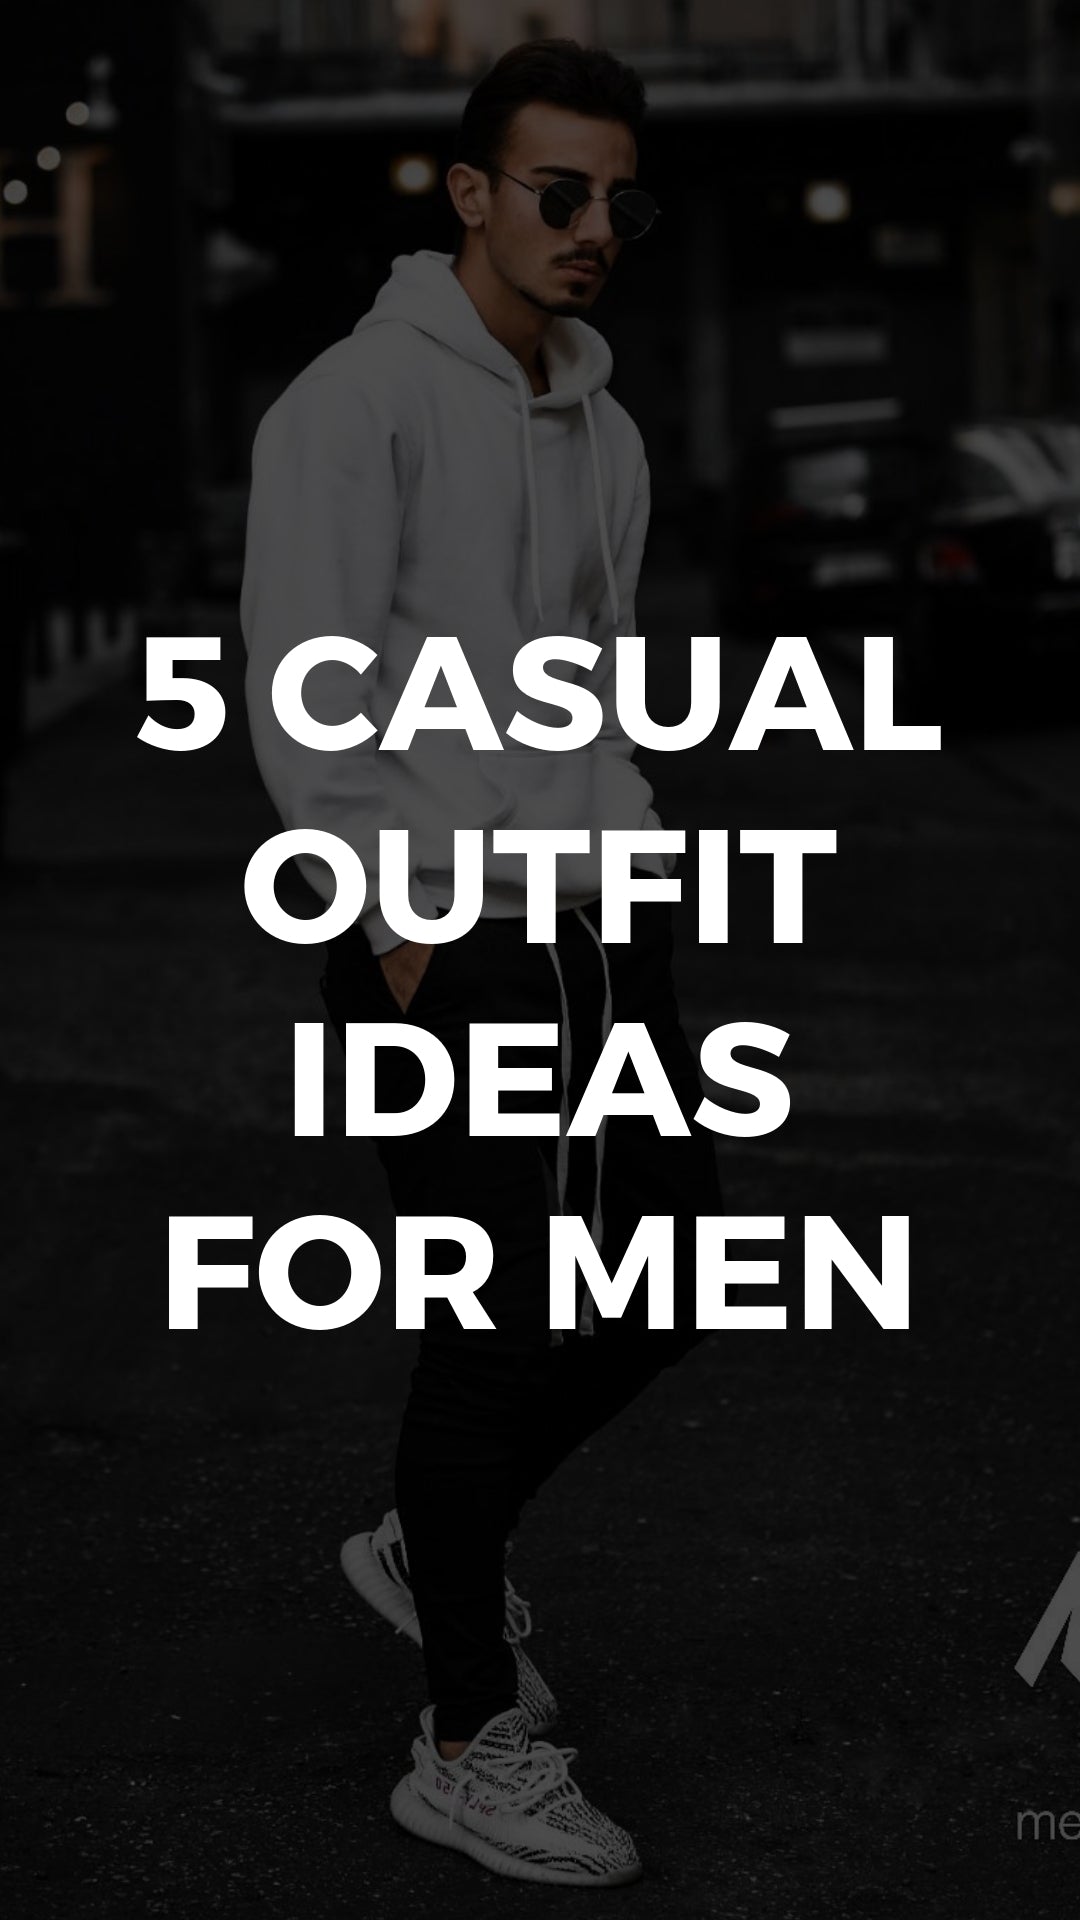 5 Casual Outfits For Young Guys #casual #outfits #mensfashion #streetstyle